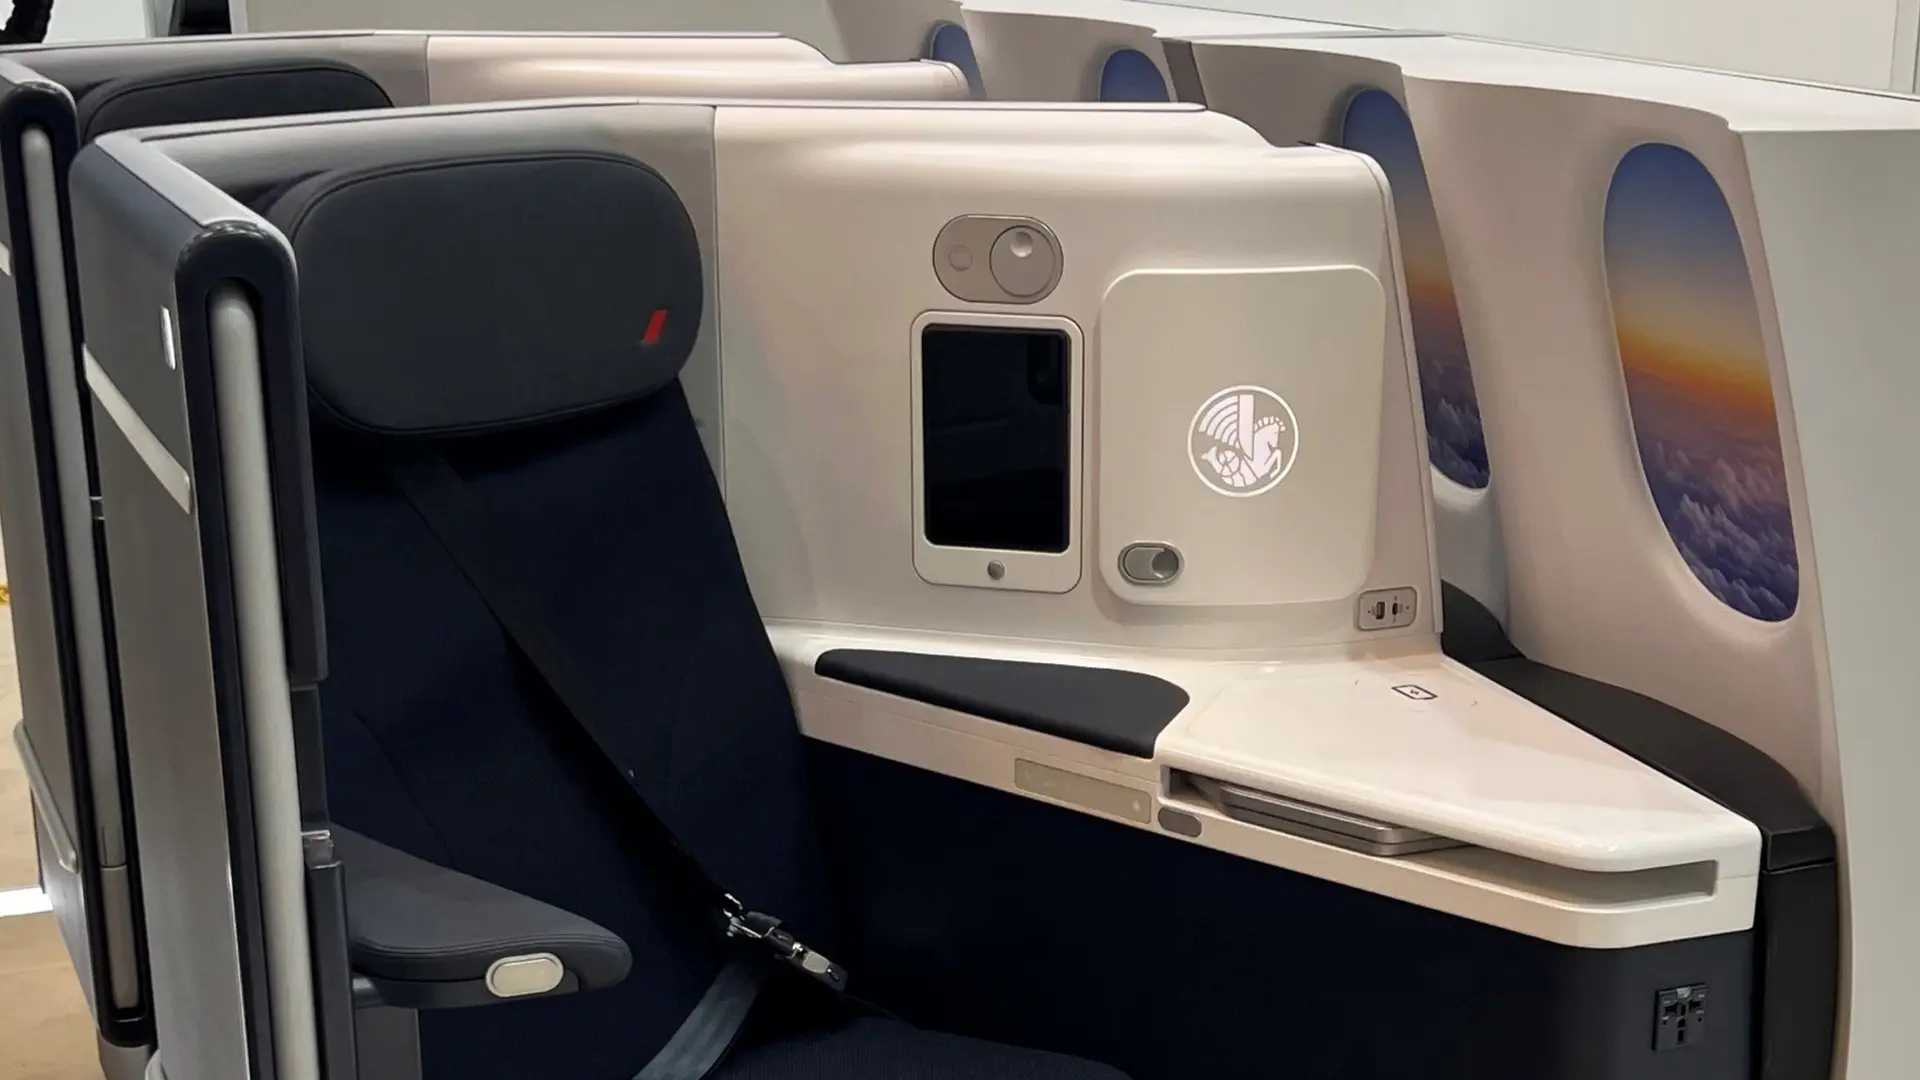 Airlines News - Air France unveils new A350 Business Class seat